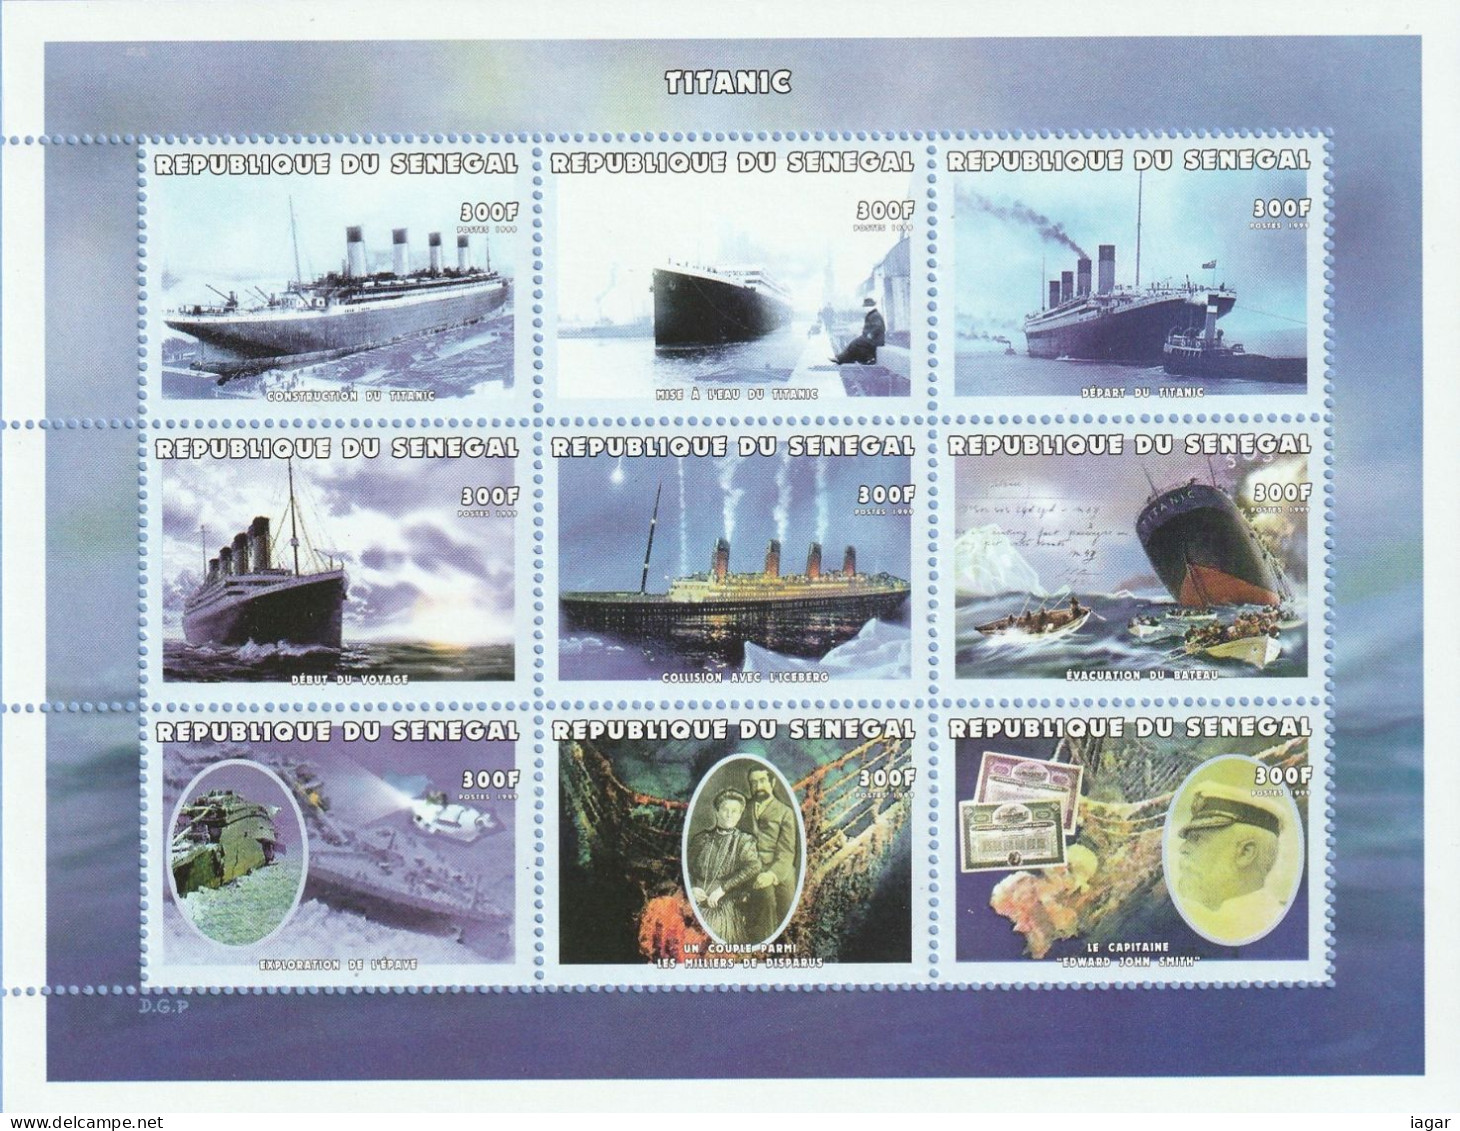 THEMATIC TRANSPORT:  HISTORY OF THE TITANIC  -  SENEGAL - Other (Sea)